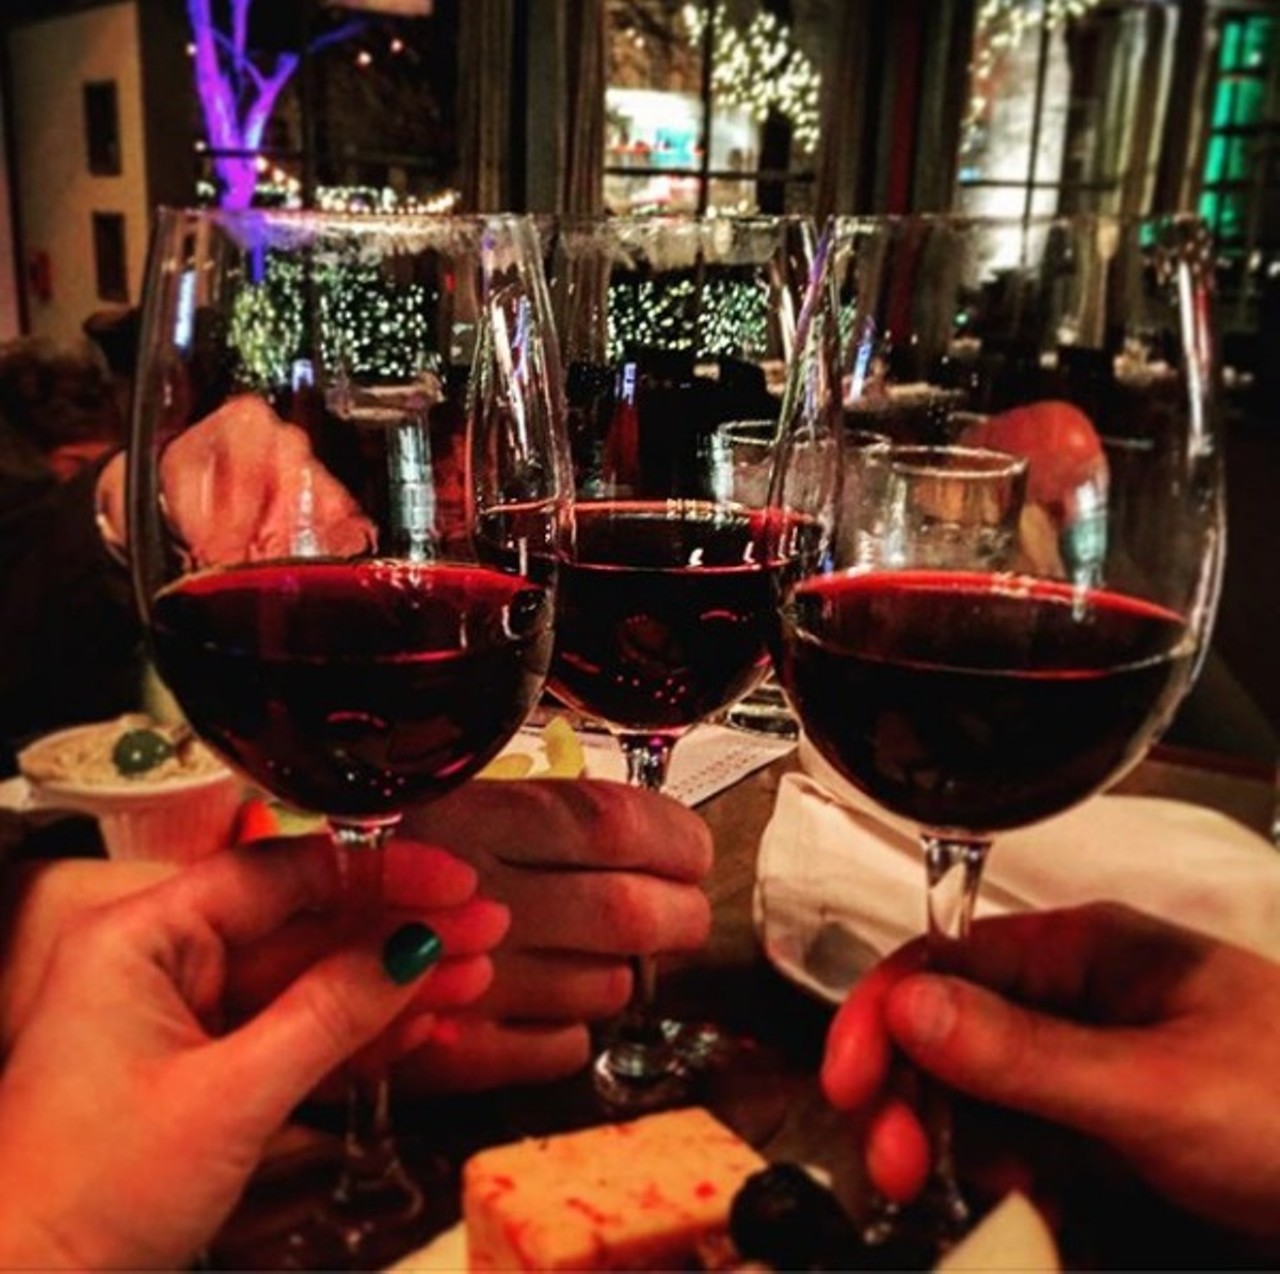 Georgetown
18515 Detroit Rd., Lakewood, 216-221-3500
Come in for a variety of red and white wines for $5 Monday through Wednesday, Friday and Saturday from 4 p.m. to 7 p.m. and Thursday 4 p.m. to 9 p.m.
Photo via erikaerika1/Instagram